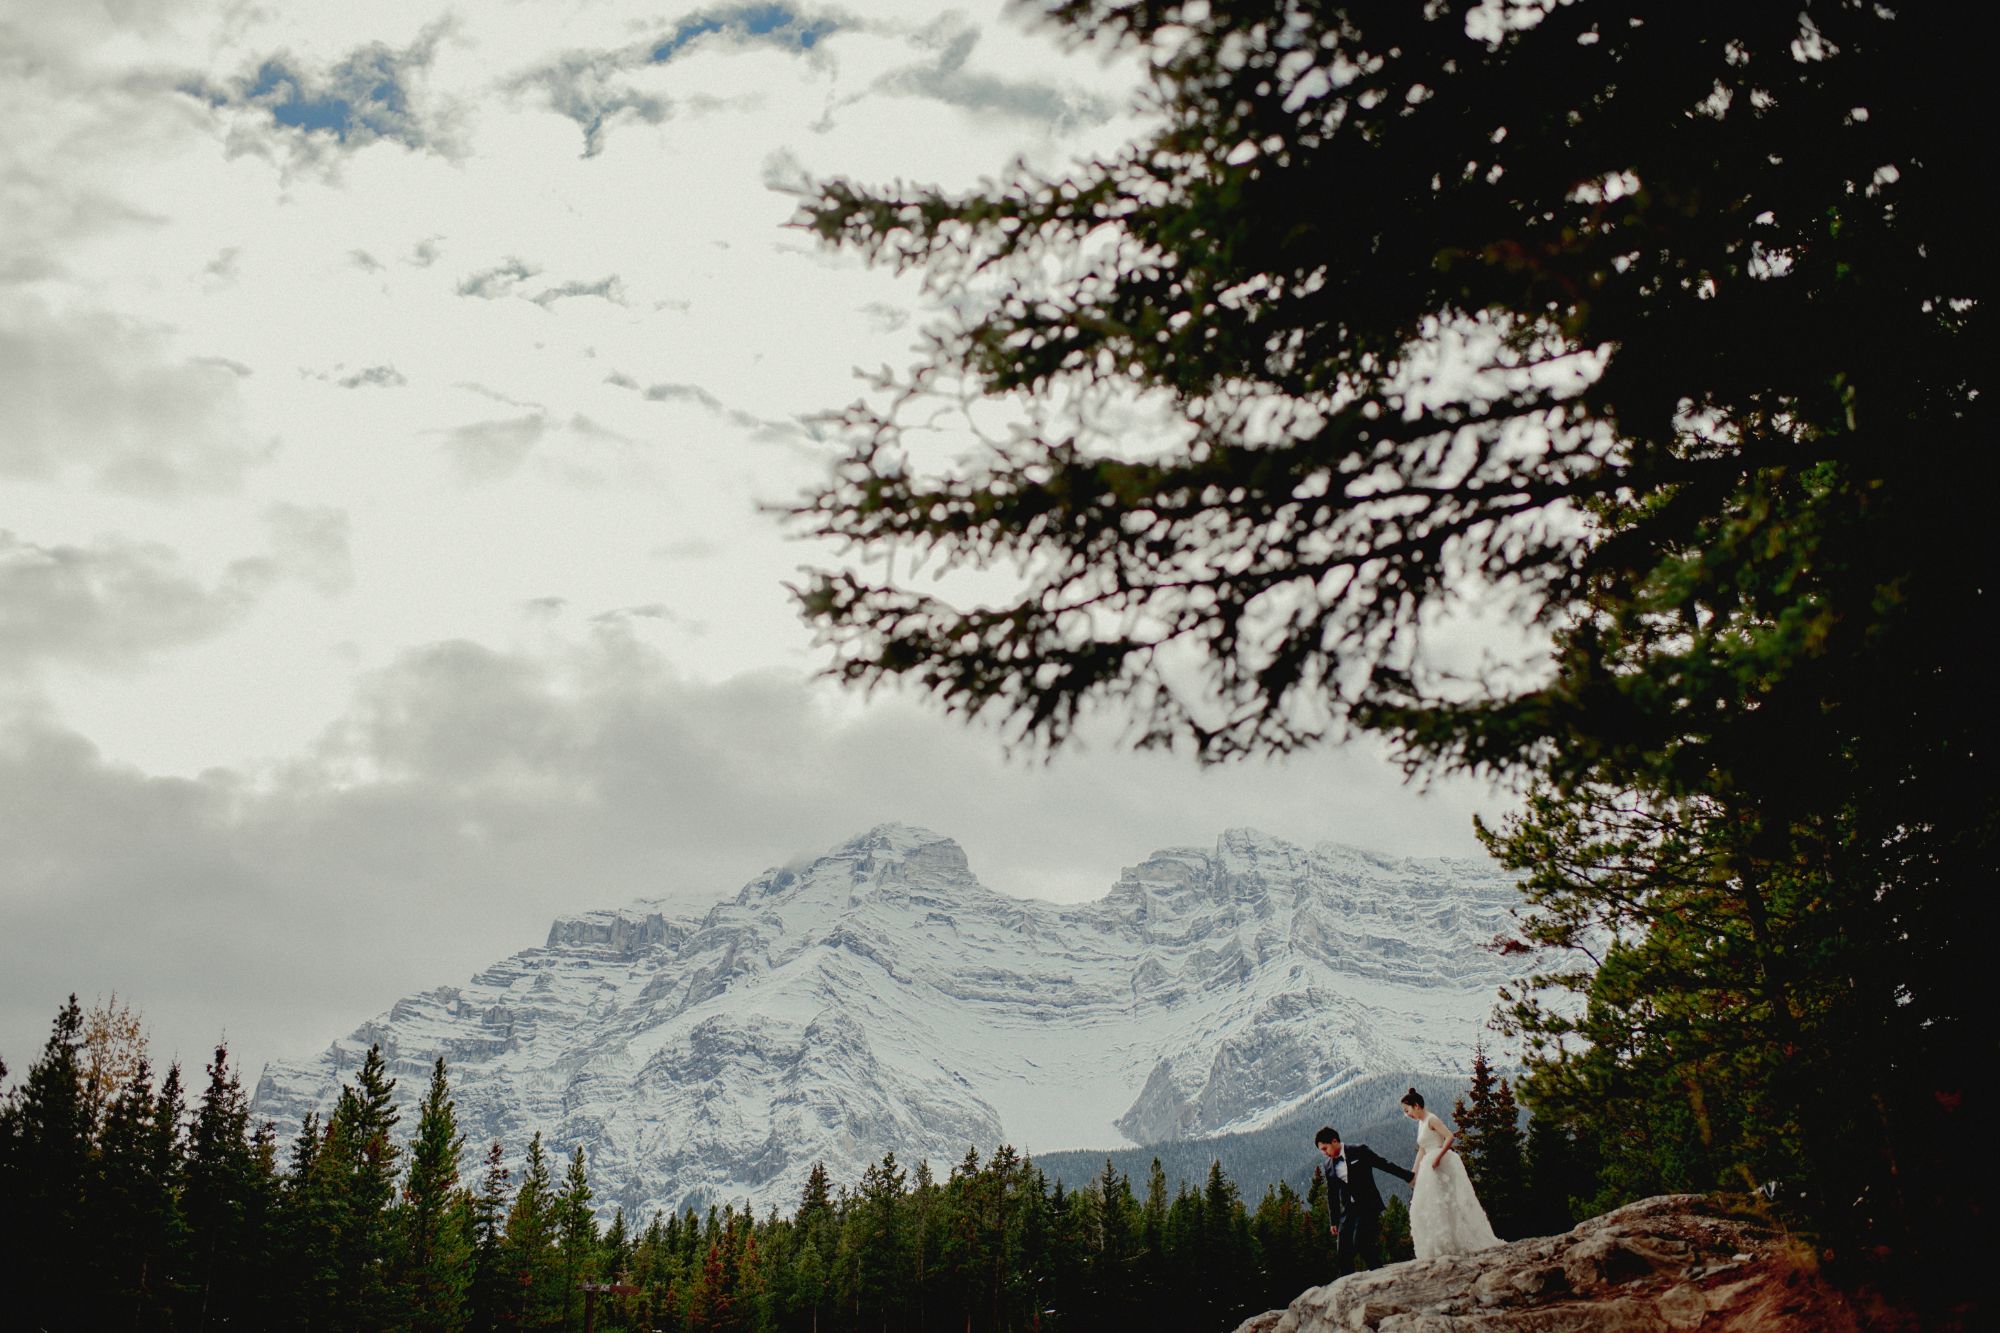 Newlywed couple in forest with snow-capped mountain in background.